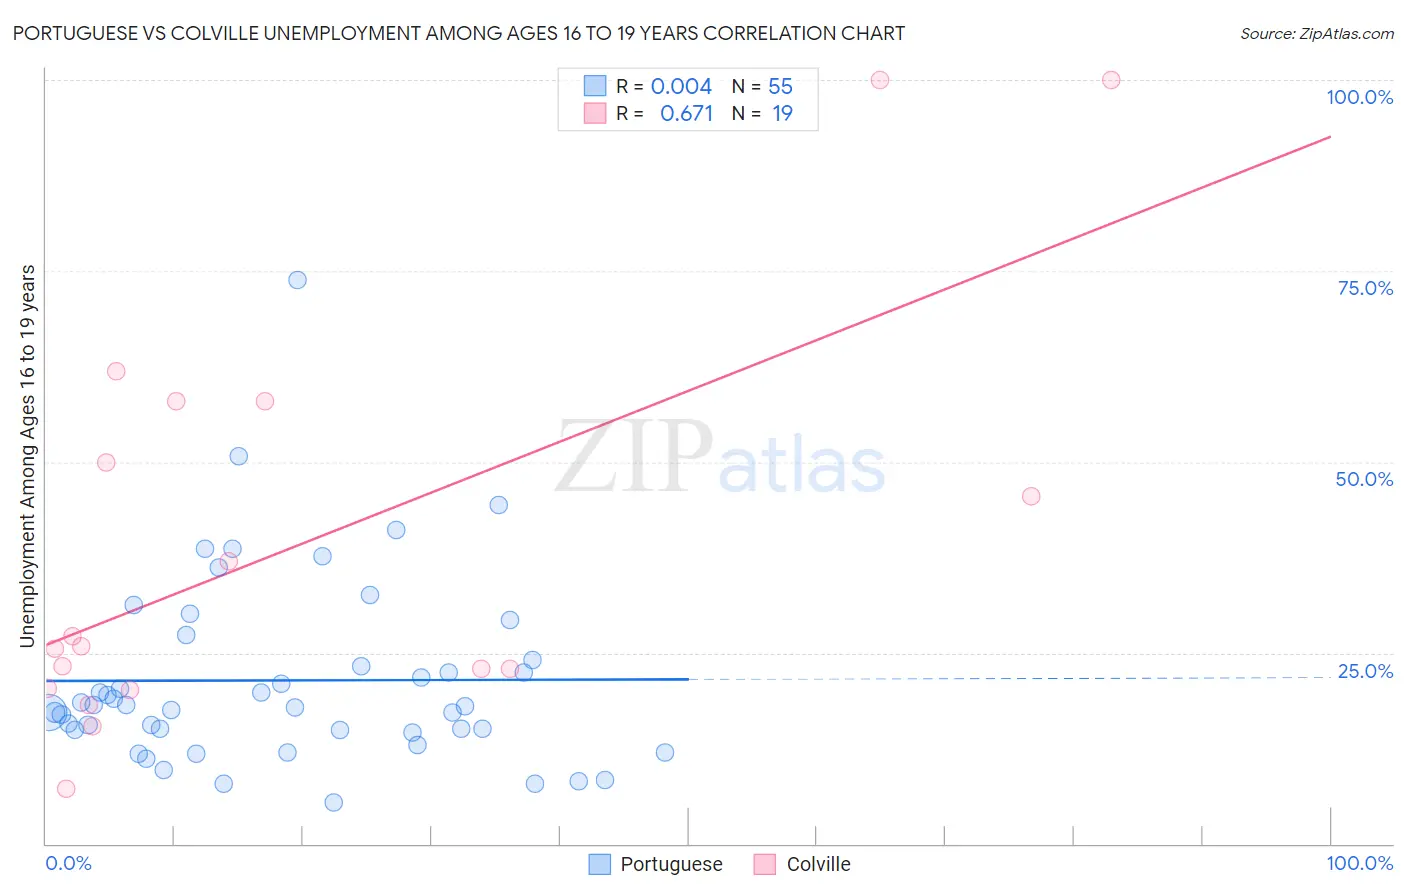 Portuguese vs Colville Unemployment Among Ages 16 to 19 years